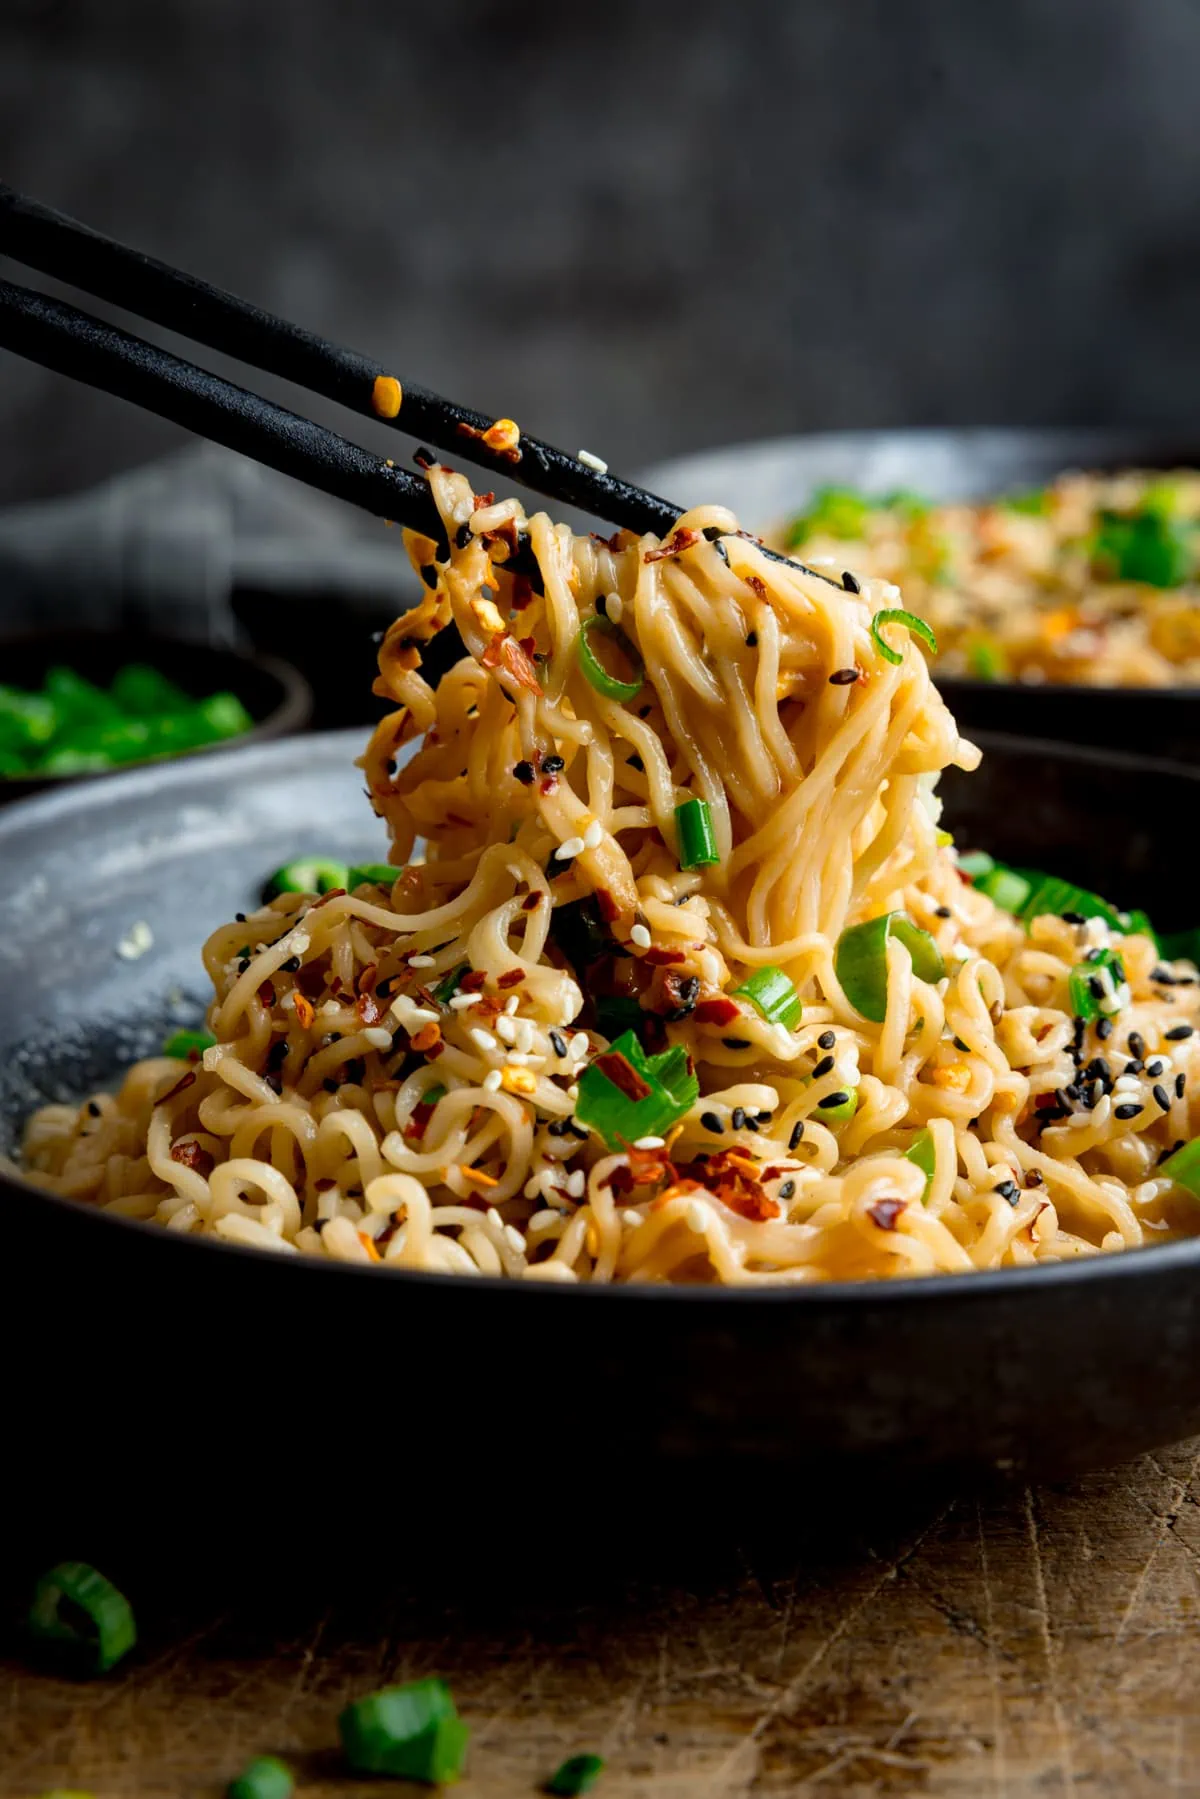 Side-on image of a black bowl, filled with ramen noodles. A pair of black chopsticks are being used to lift the noodles. The bowl is on a wooden table. There are spring onions scattered around and a further bowl of noodles in the background.